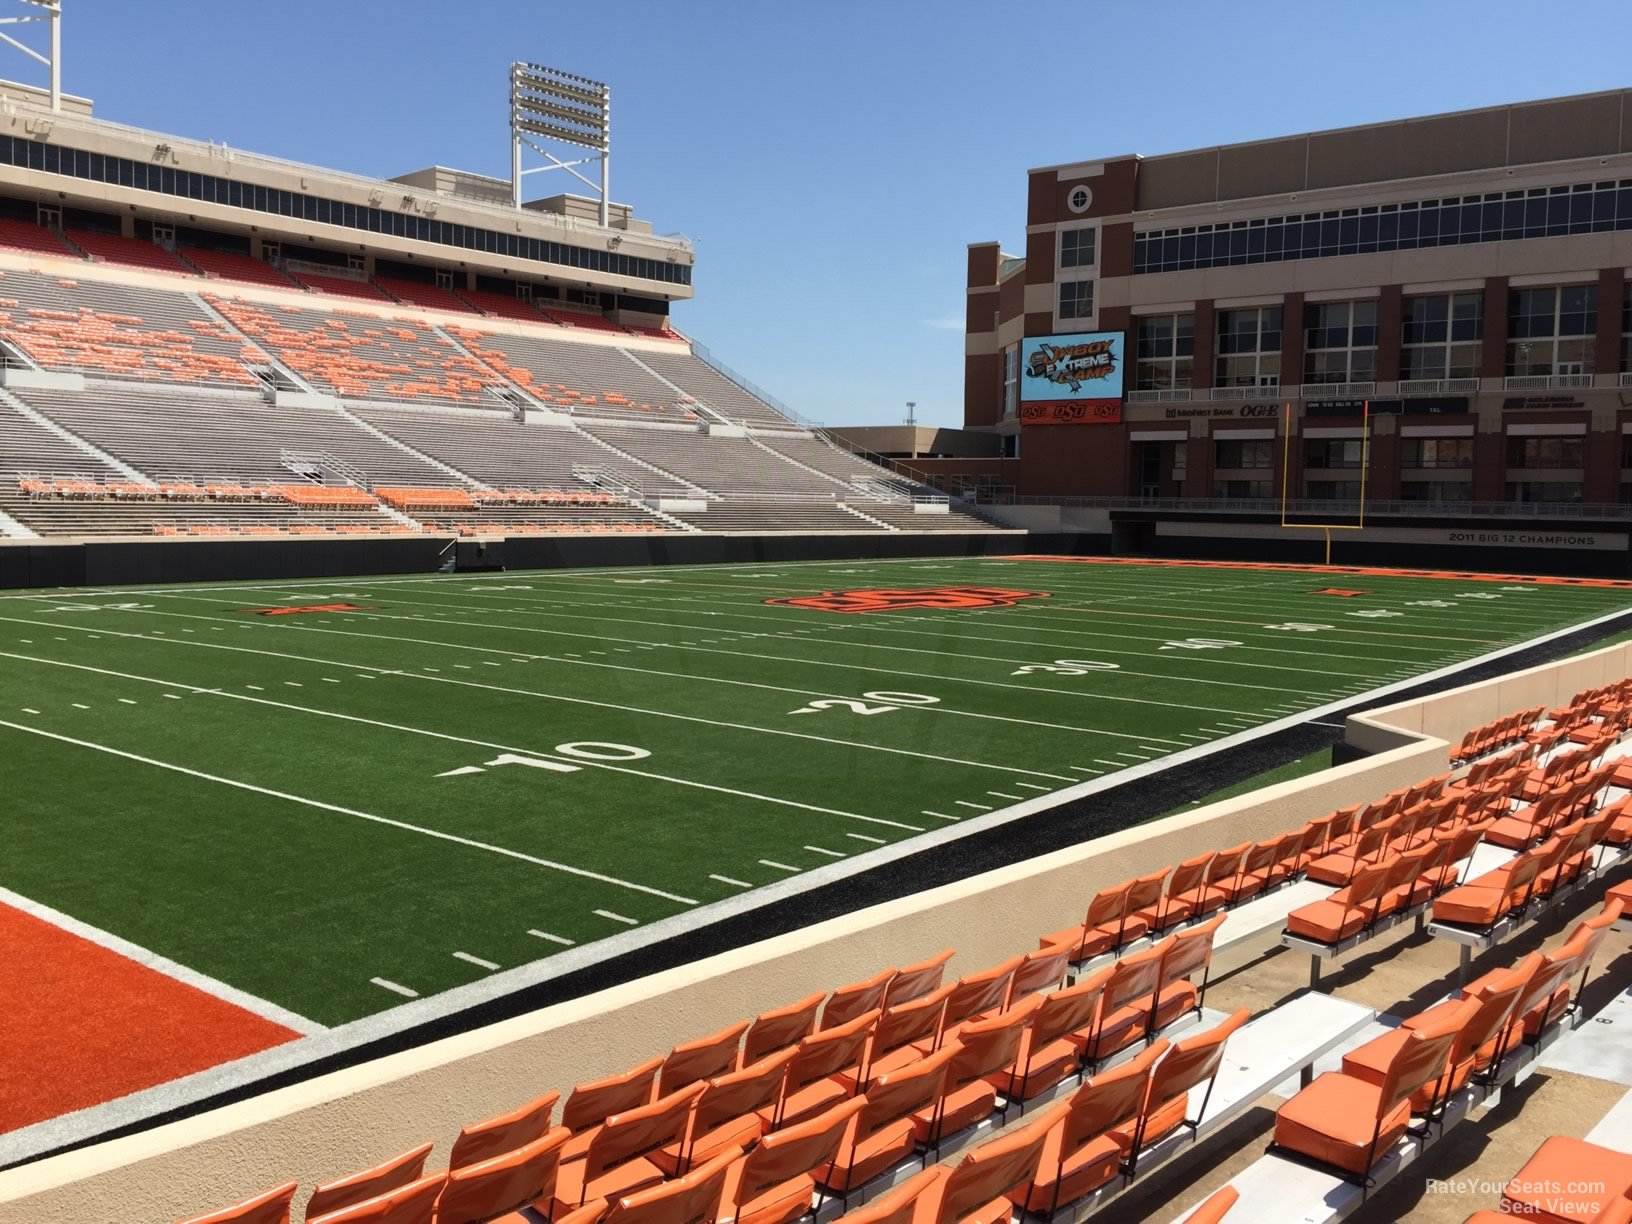 section 108, row 10 seat view  - boone pickens stadium